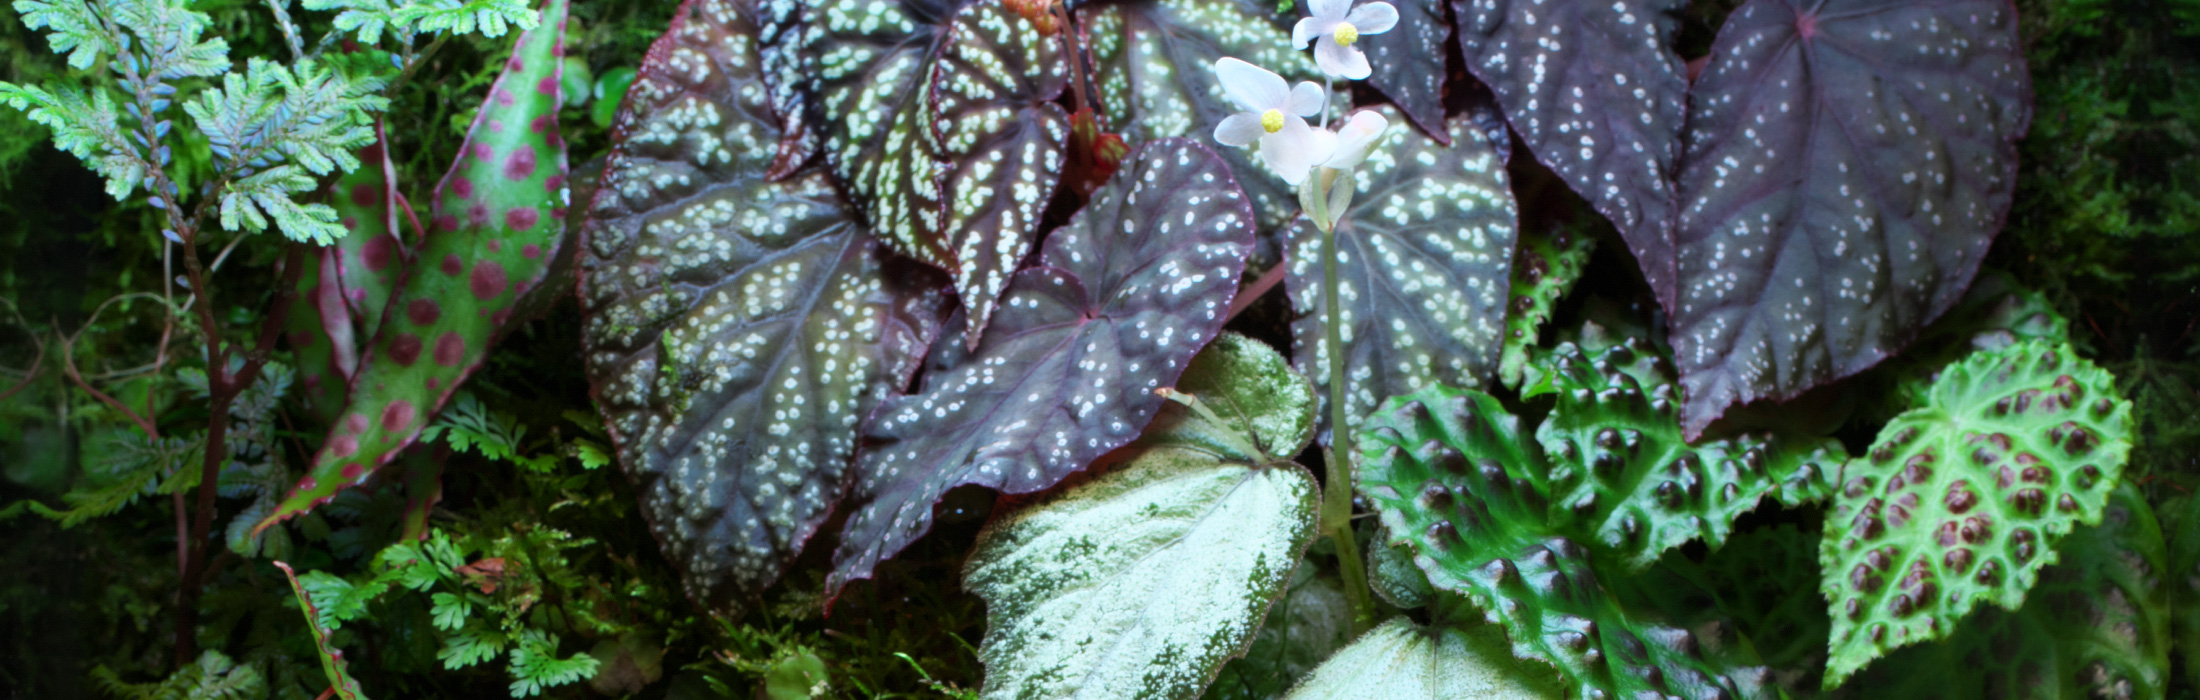 ADA JUNGLE PLANTS – Progenitor Begonia are now available in new style –